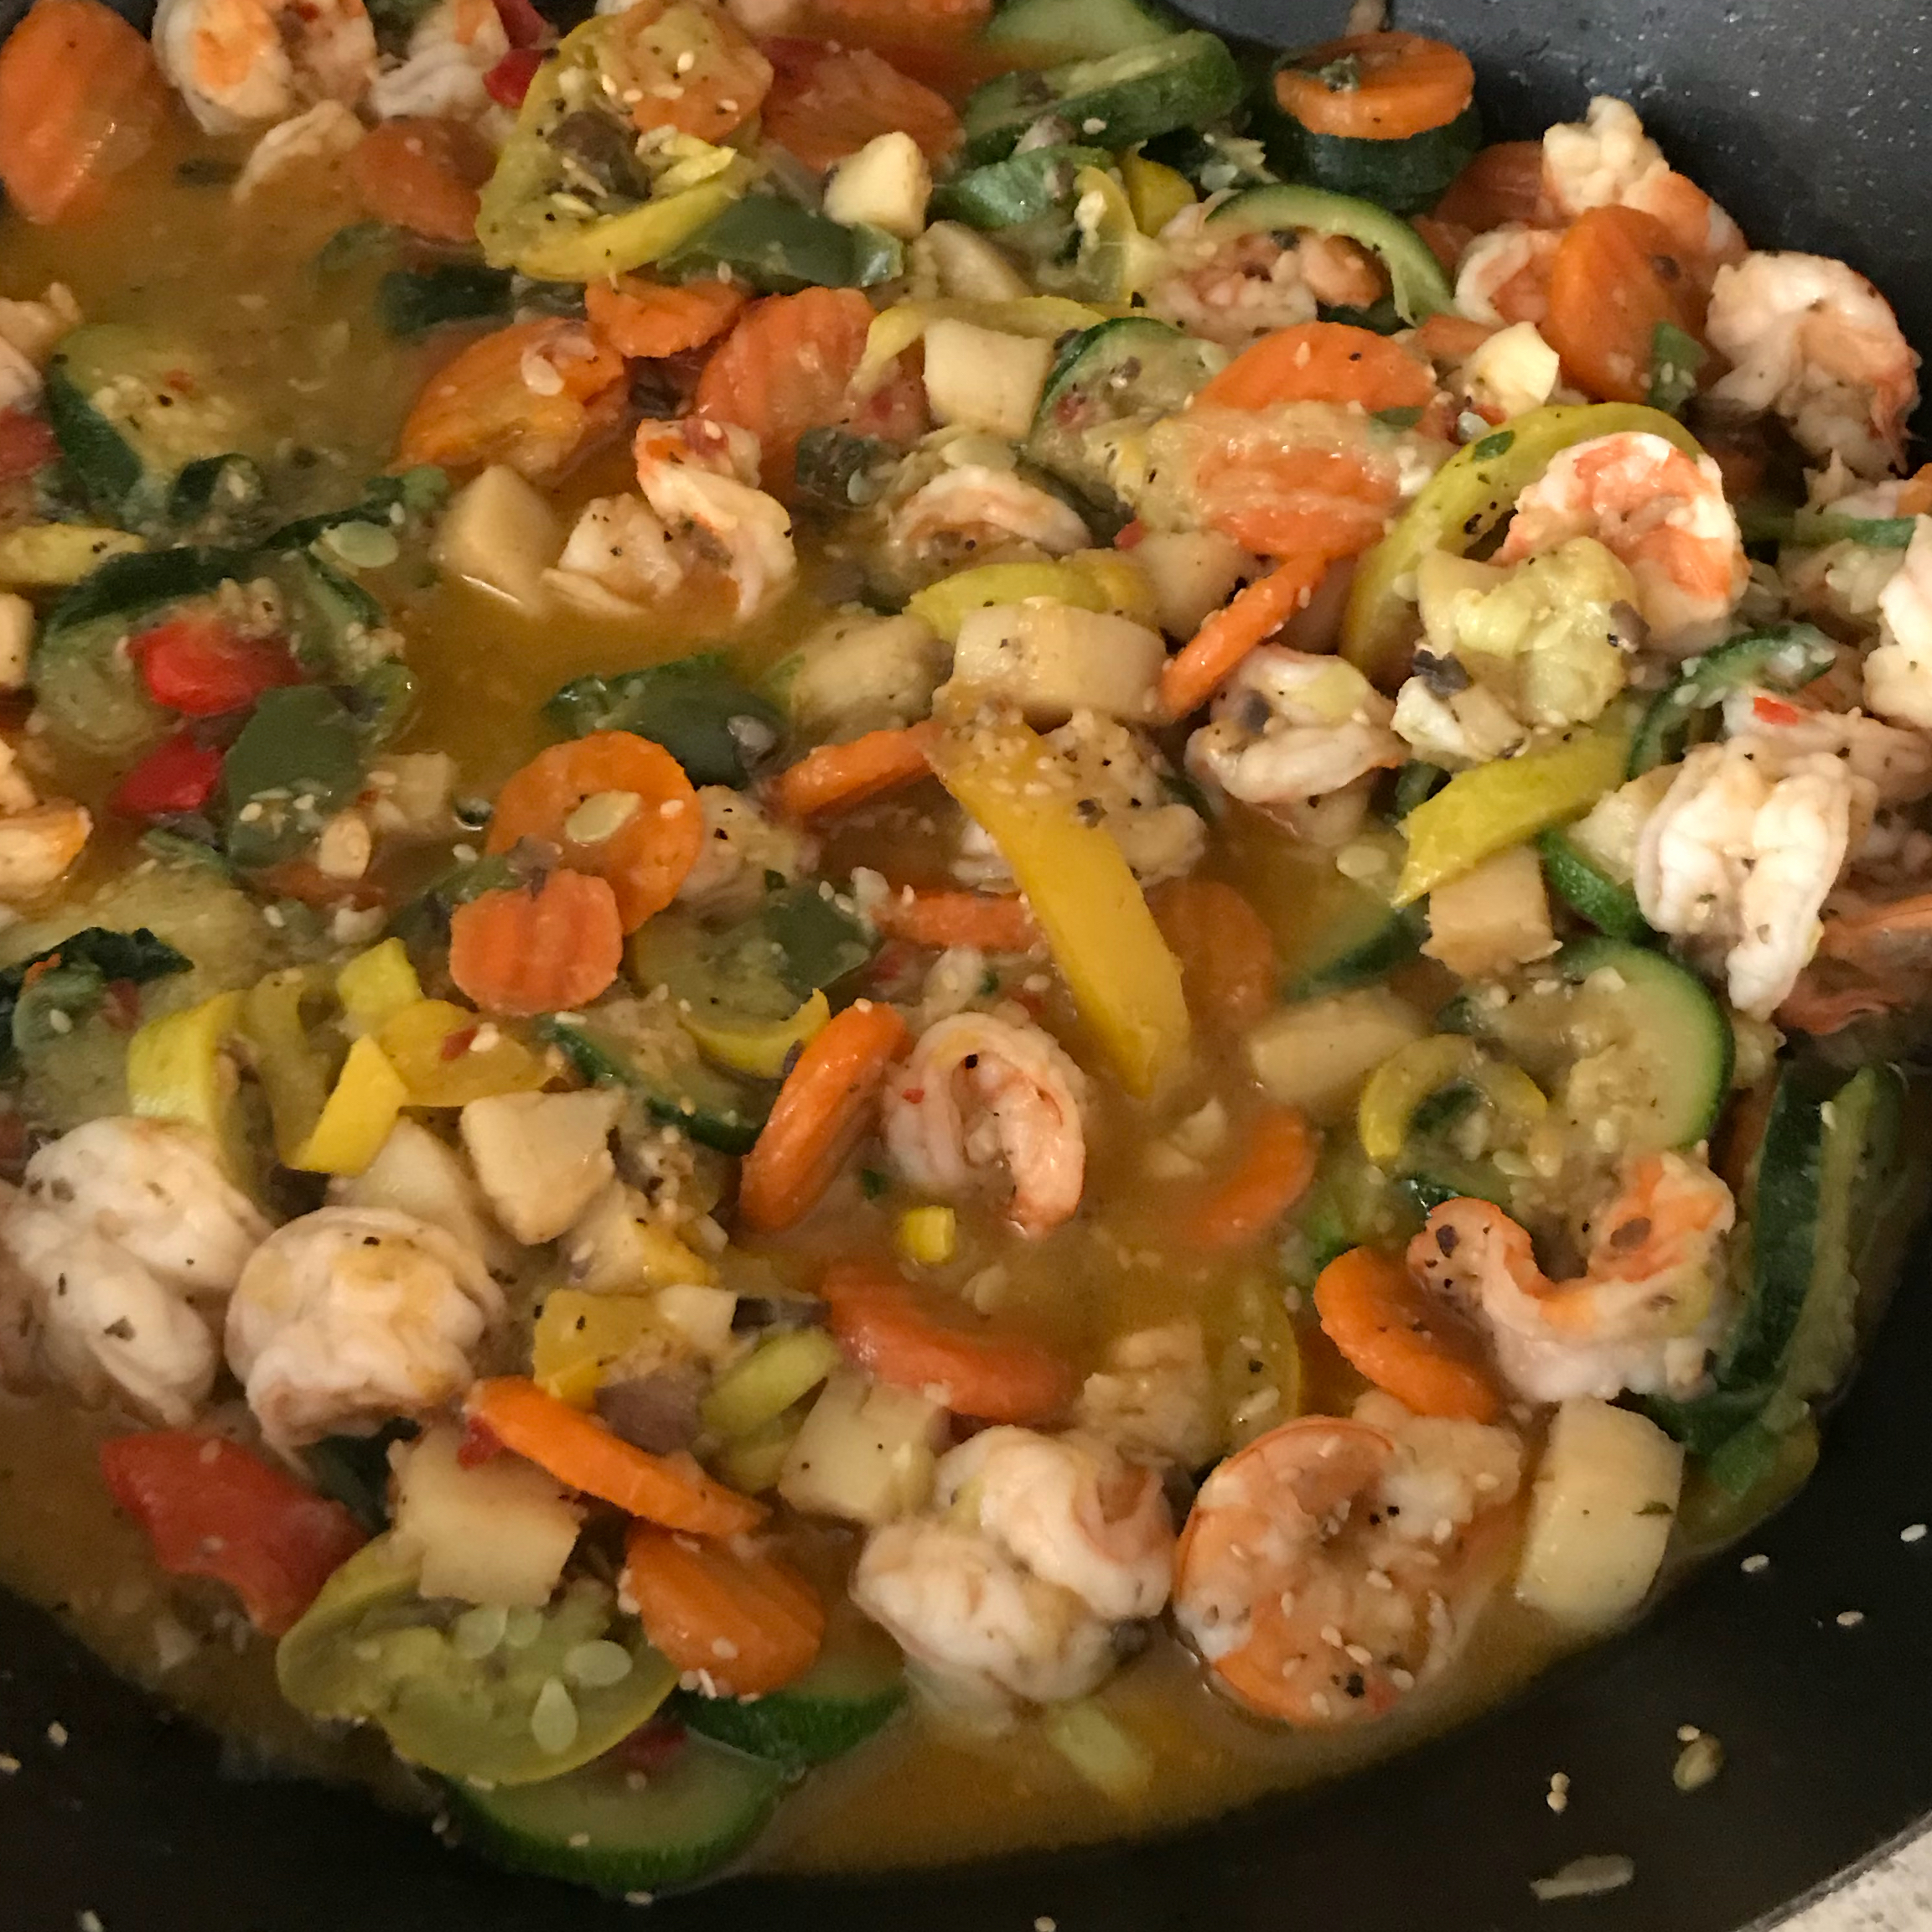 Lady Linda's Delightful Shrimp and Scallop Stir-Fry cuthbert